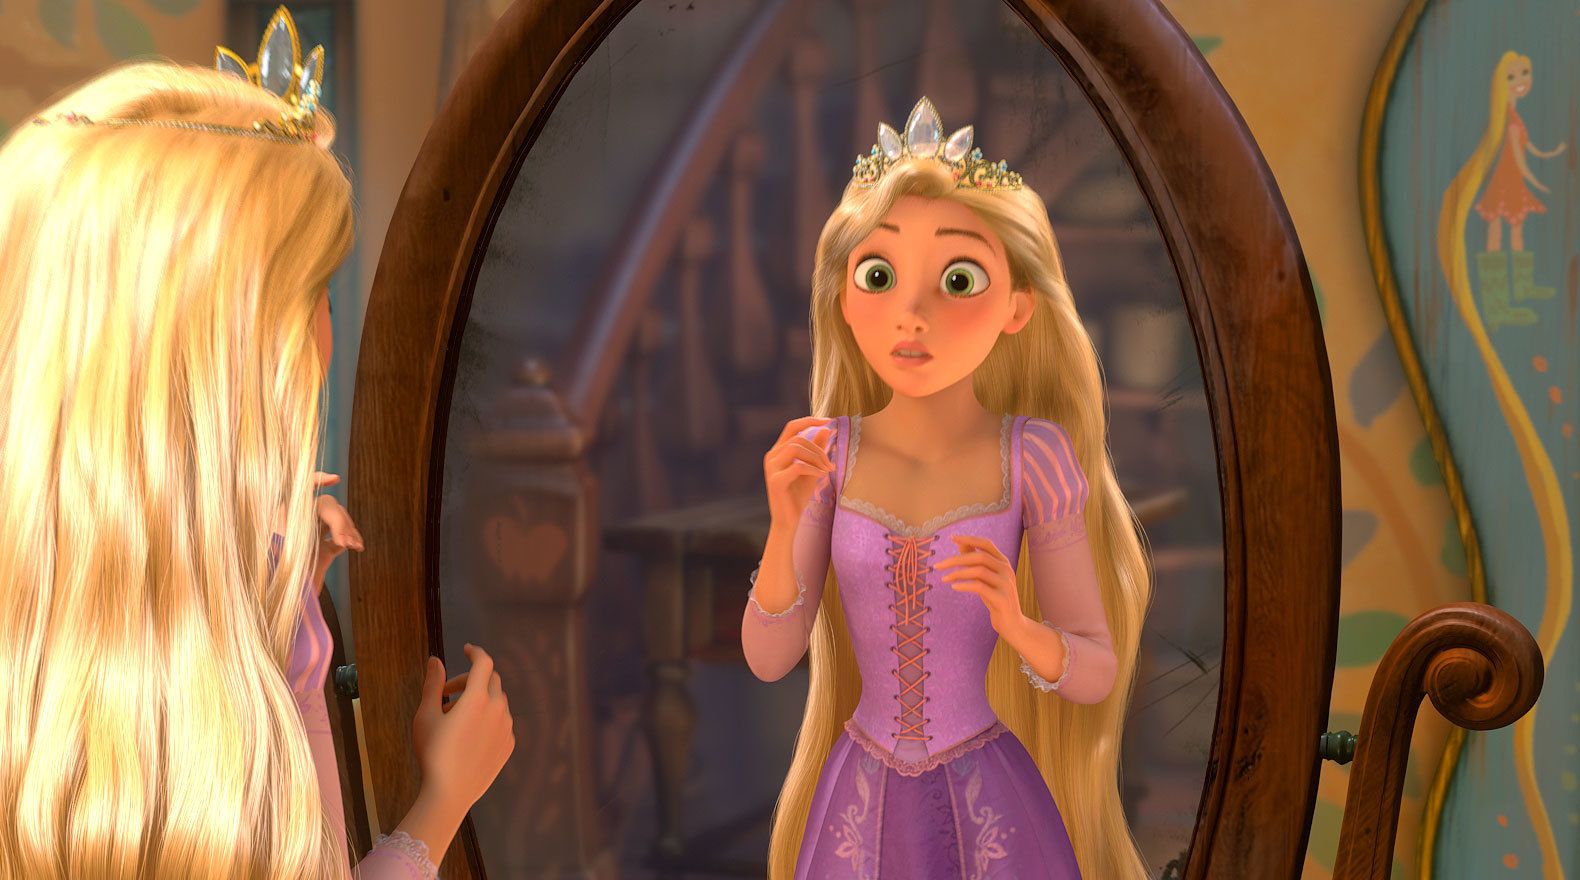 Rapunzel stands in front of a mirror while wearing a tiara